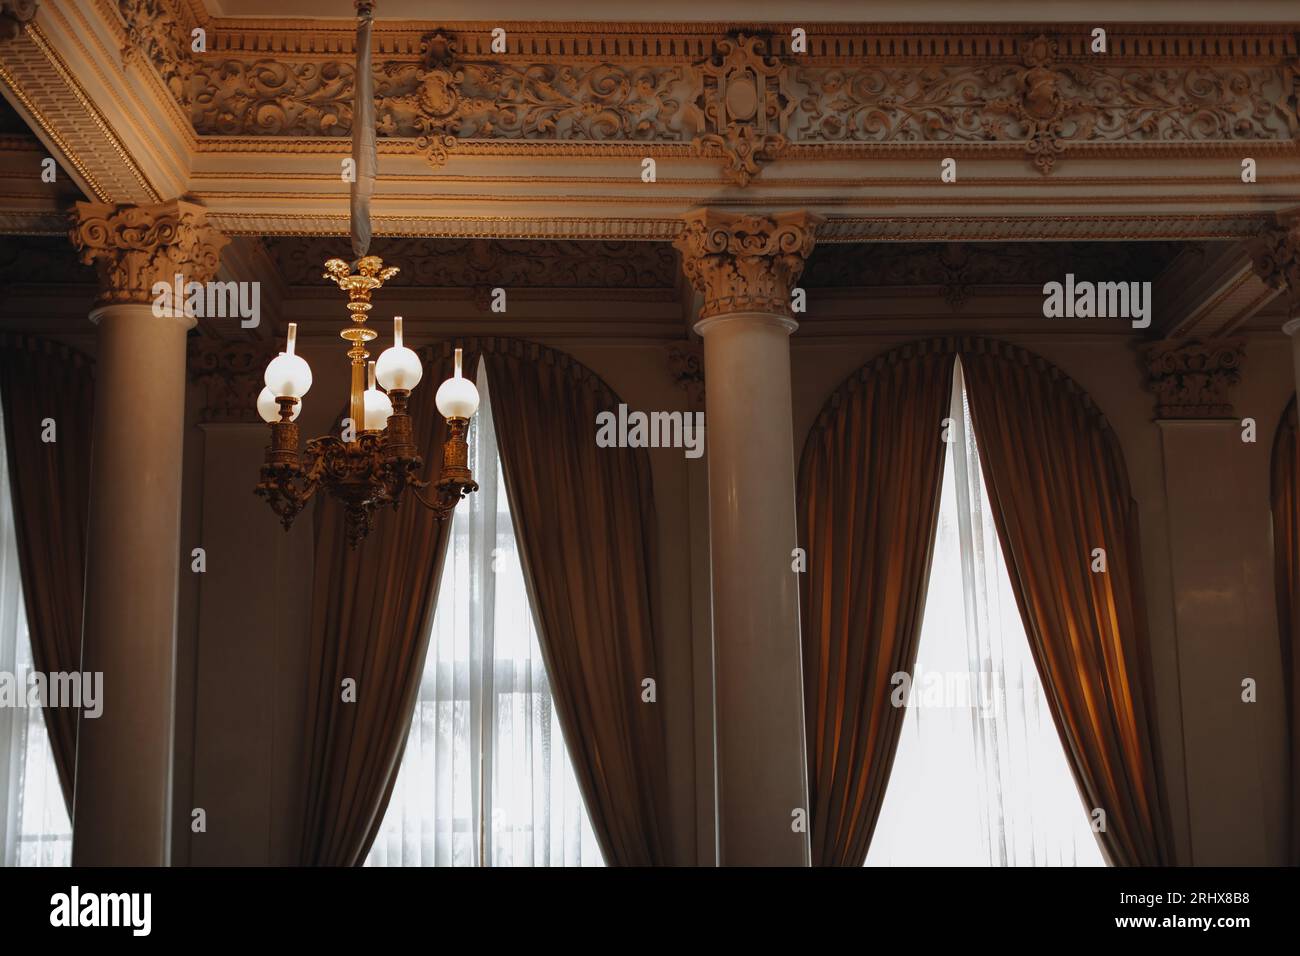 Vintage brown gold interior with marble columns and royal chandelier. Aesthetics of historical architecture Stock Photo